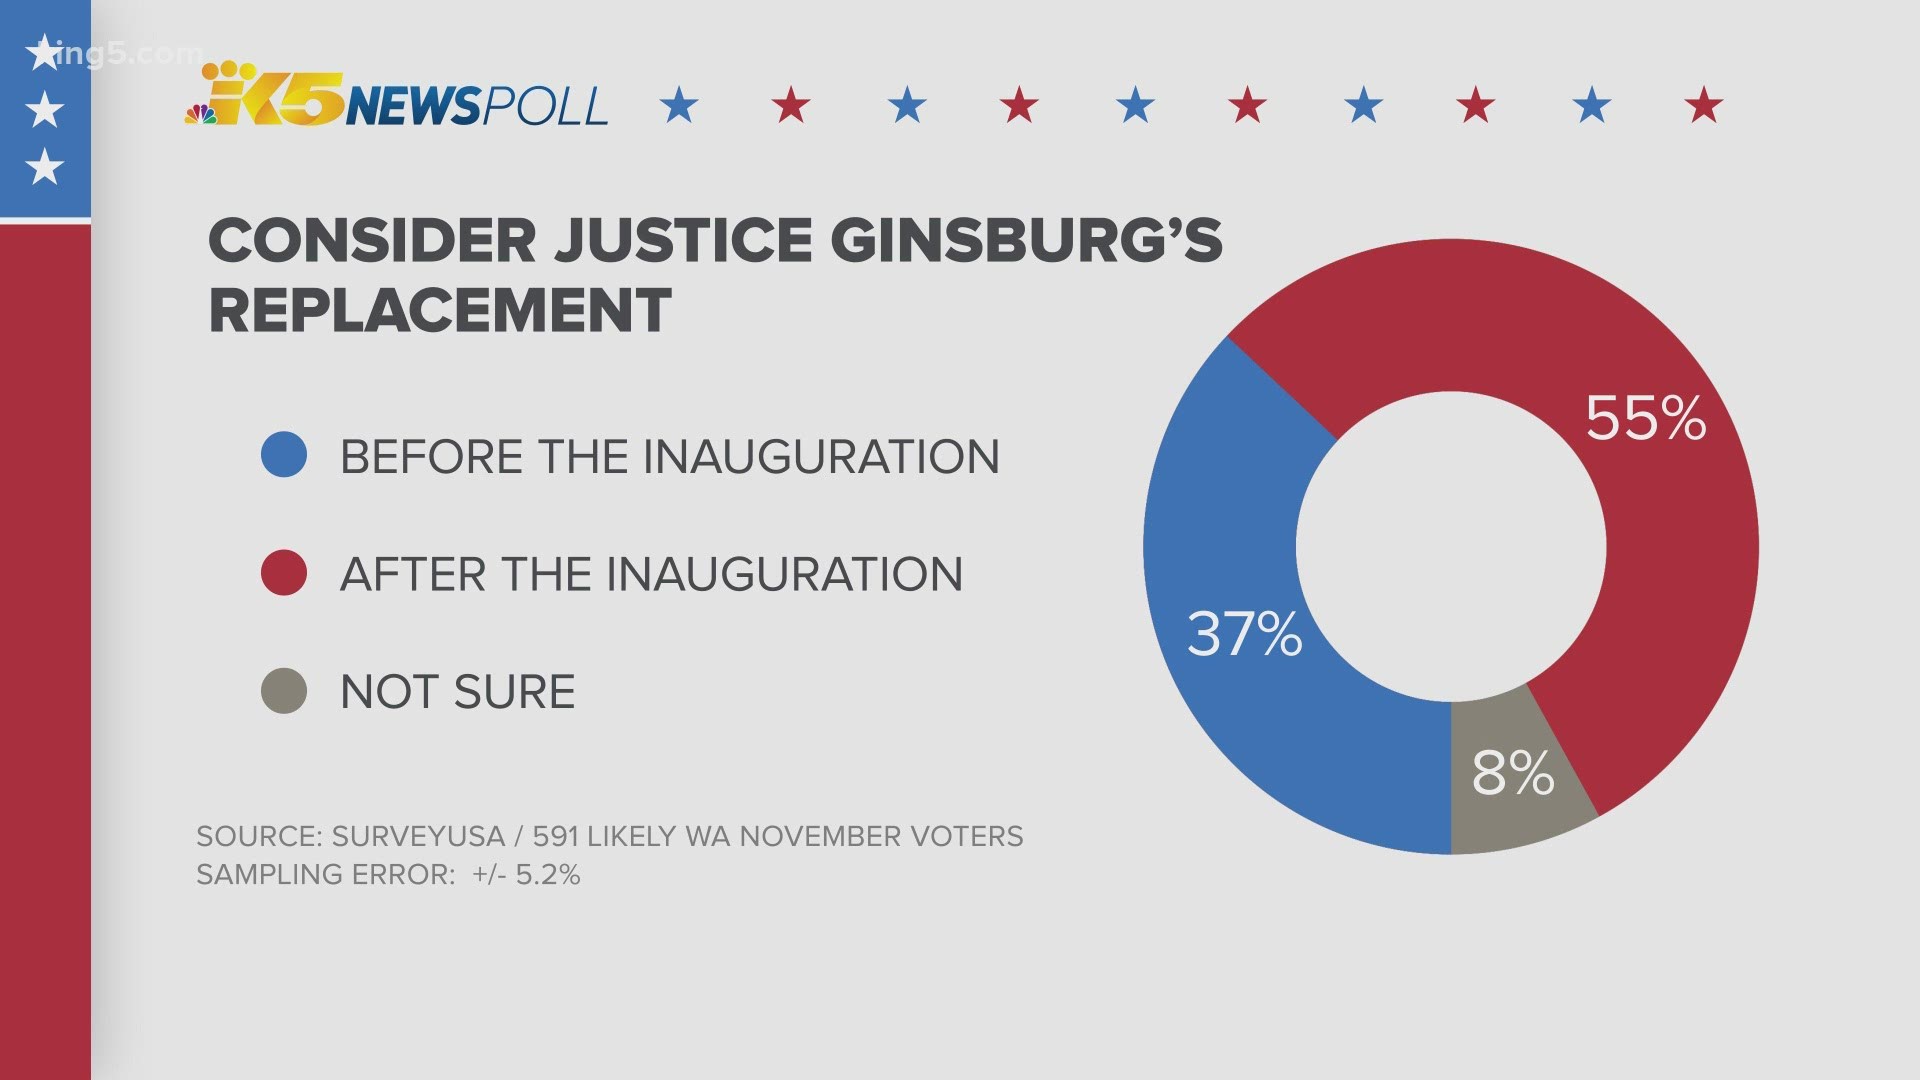 An exclusive KING 5 News poll found 55% of surveyed voters want a replacement for Supreme Court Justice Ruth Bader Ginsburg to be considered after the inauguration.